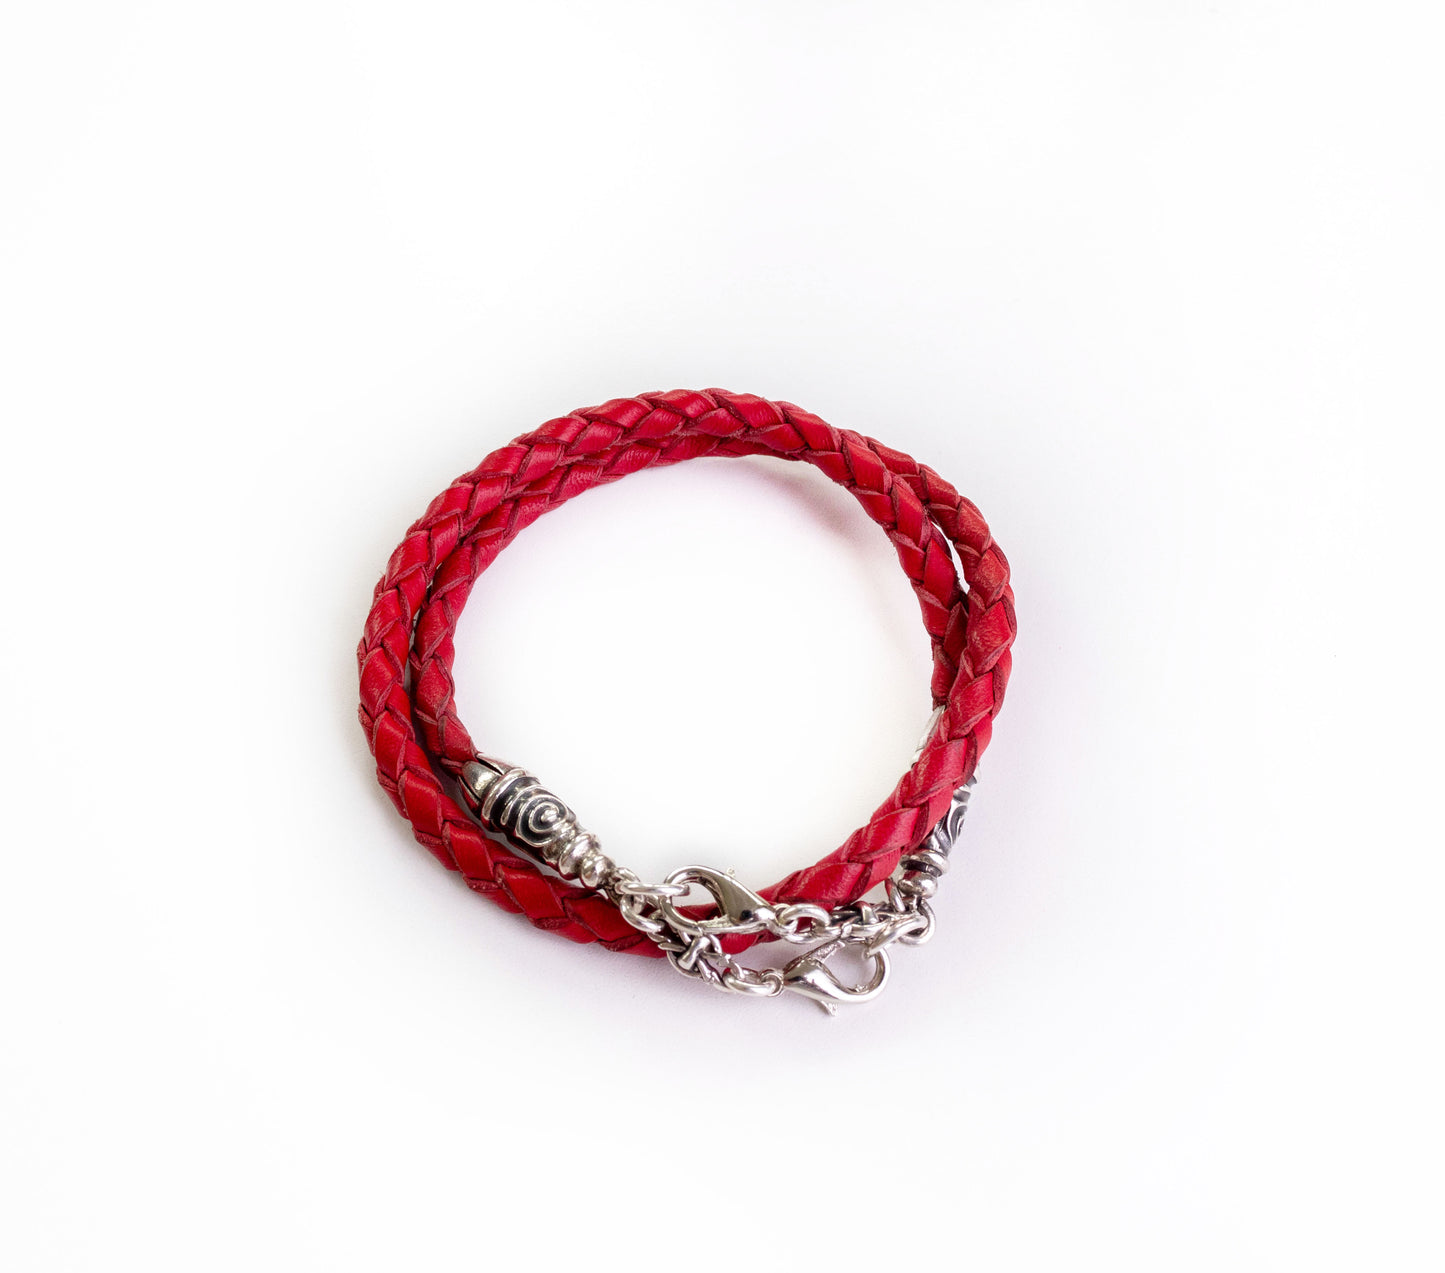 Full-Grain Genuine vegetable-tanned Leather & 925 Sterling Silver Case for iPhone. Red Genuine Leather Bracelet/Choker/Strap 4 strands hand-braided.- F22